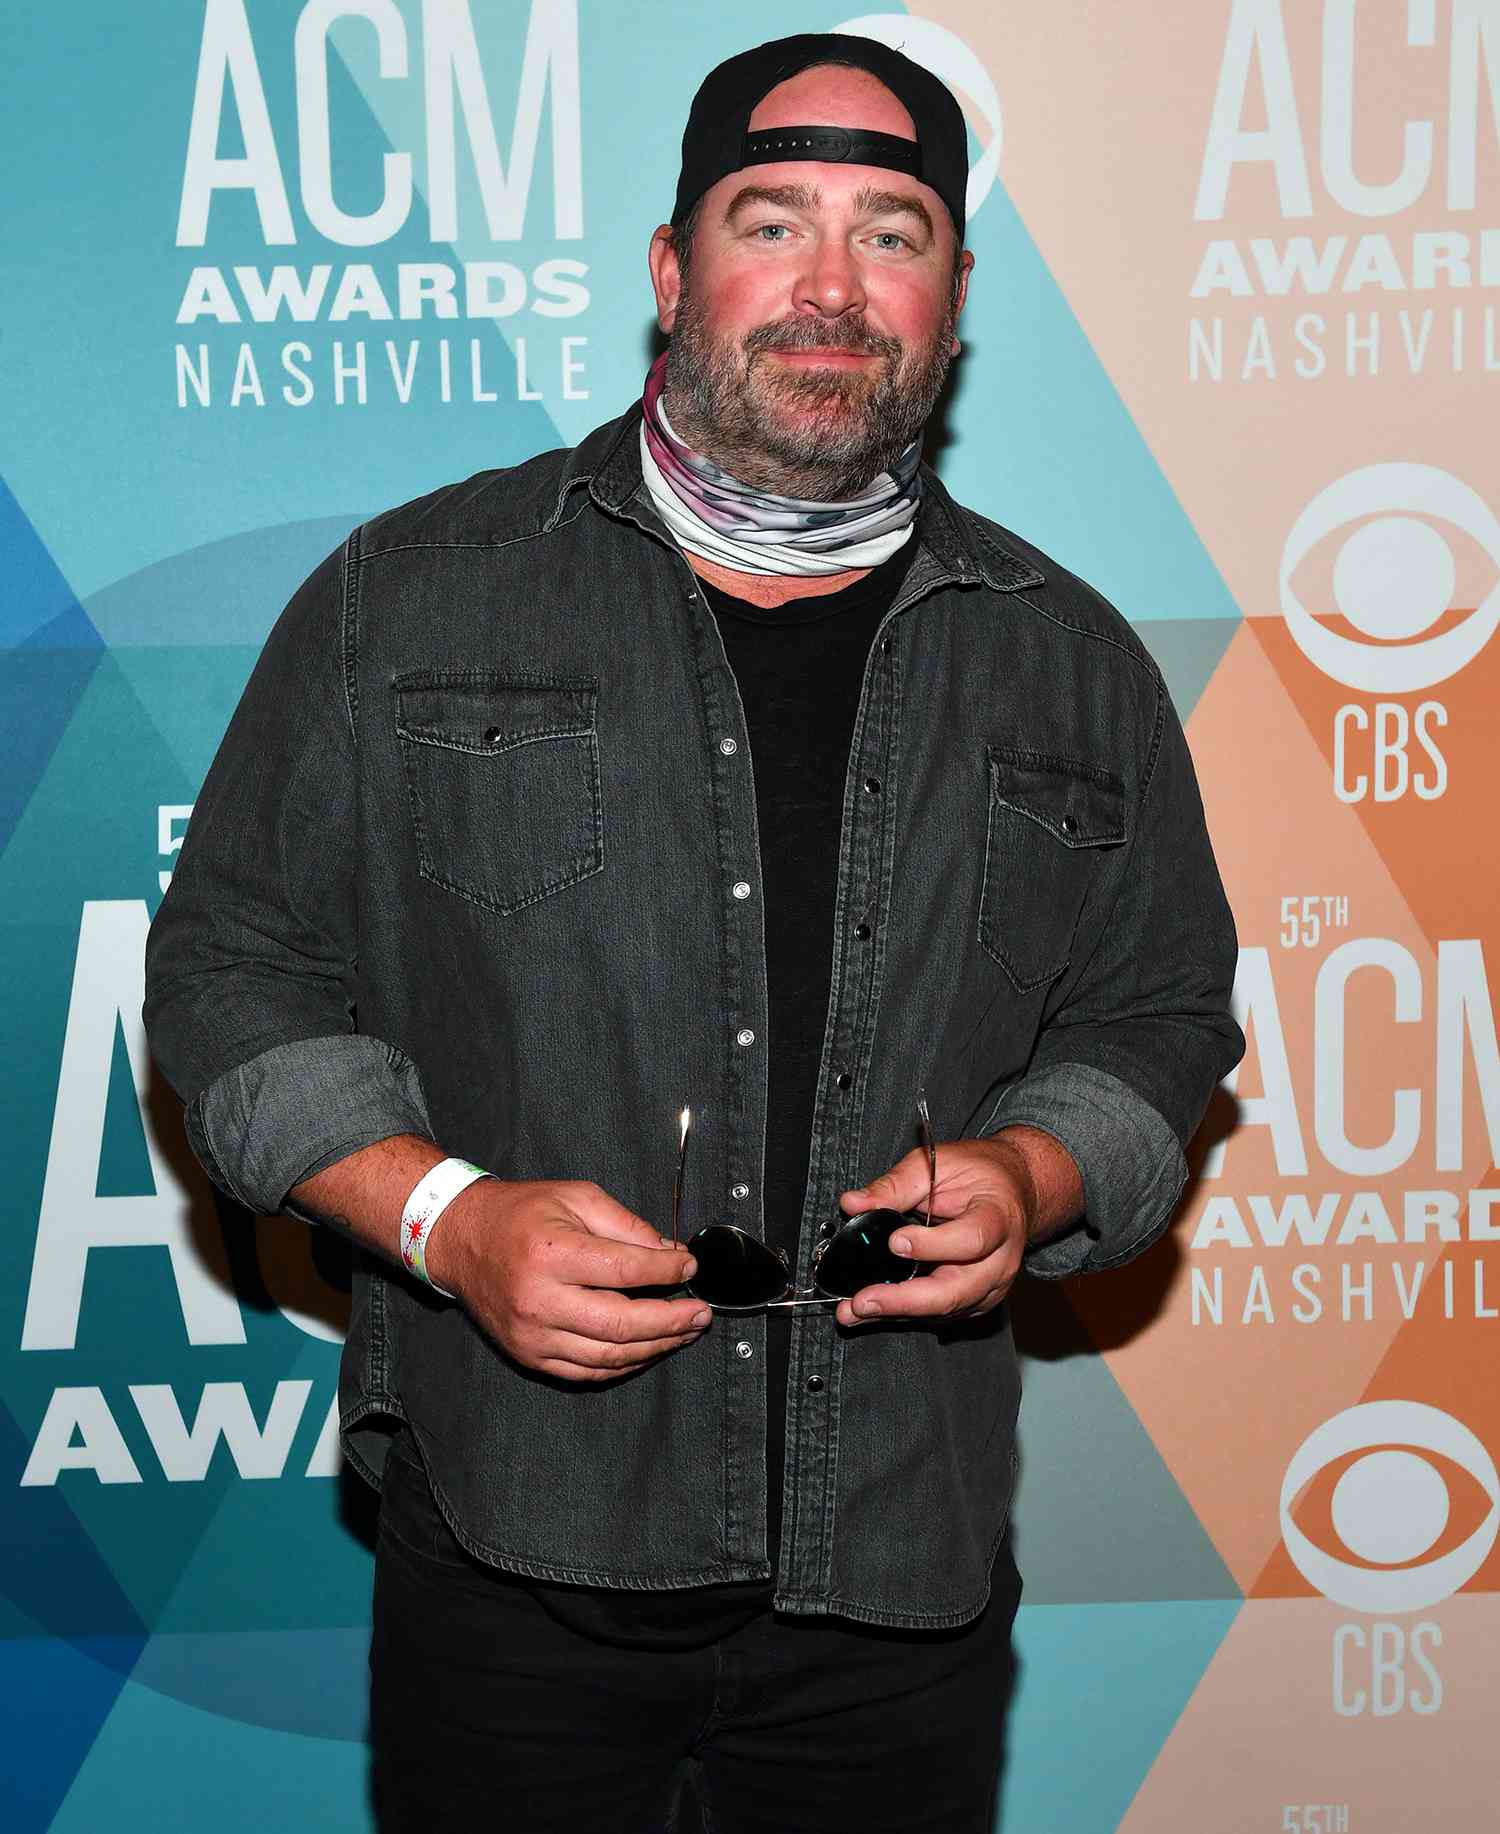 <p>Country singer Lee Brice tested positive for COVID-19, keeping him from attending and performing at the 2020 Country Music Association Awards.</p>
                            <p>A rep for the country singer told the Associated Press that Brice had tested positive for the coronavirus ahead of the show and would no longer be performing with Carly Pearce. The duo was slated to take the stage together after being nominated for their duet "I Hope You're Happy Now" for musical event of the year and music video of the year.</p>
                            <p>While Brice can't attend country music's biggest night, his rep told the outlet that the "I Don't Dance" singer is still "in good spirits and not experiencing any symptoms." He will be isolating at his home for the next couple of weeks until he is cleared by a doctor.</p>
                            